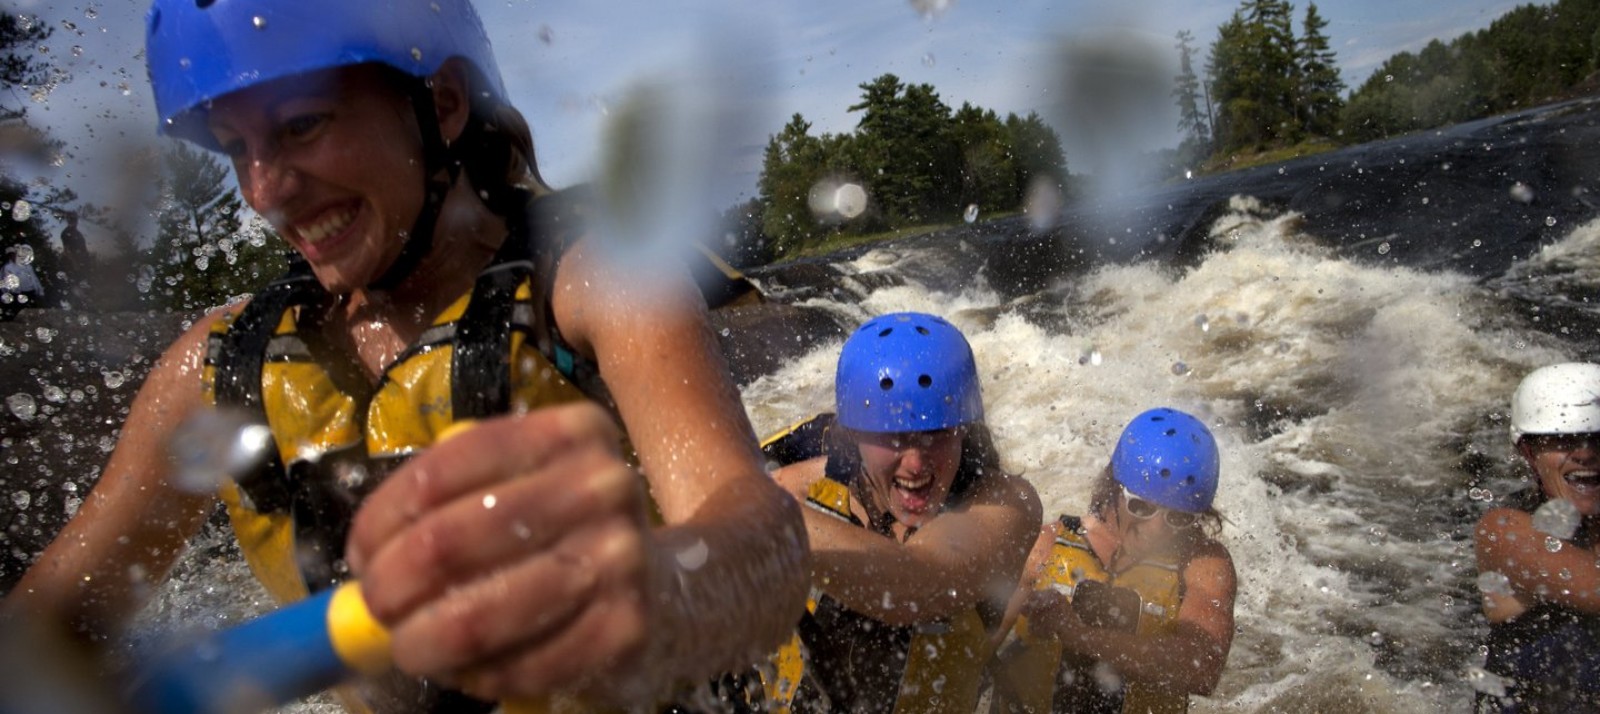 A group smiling while whitewater rafting.